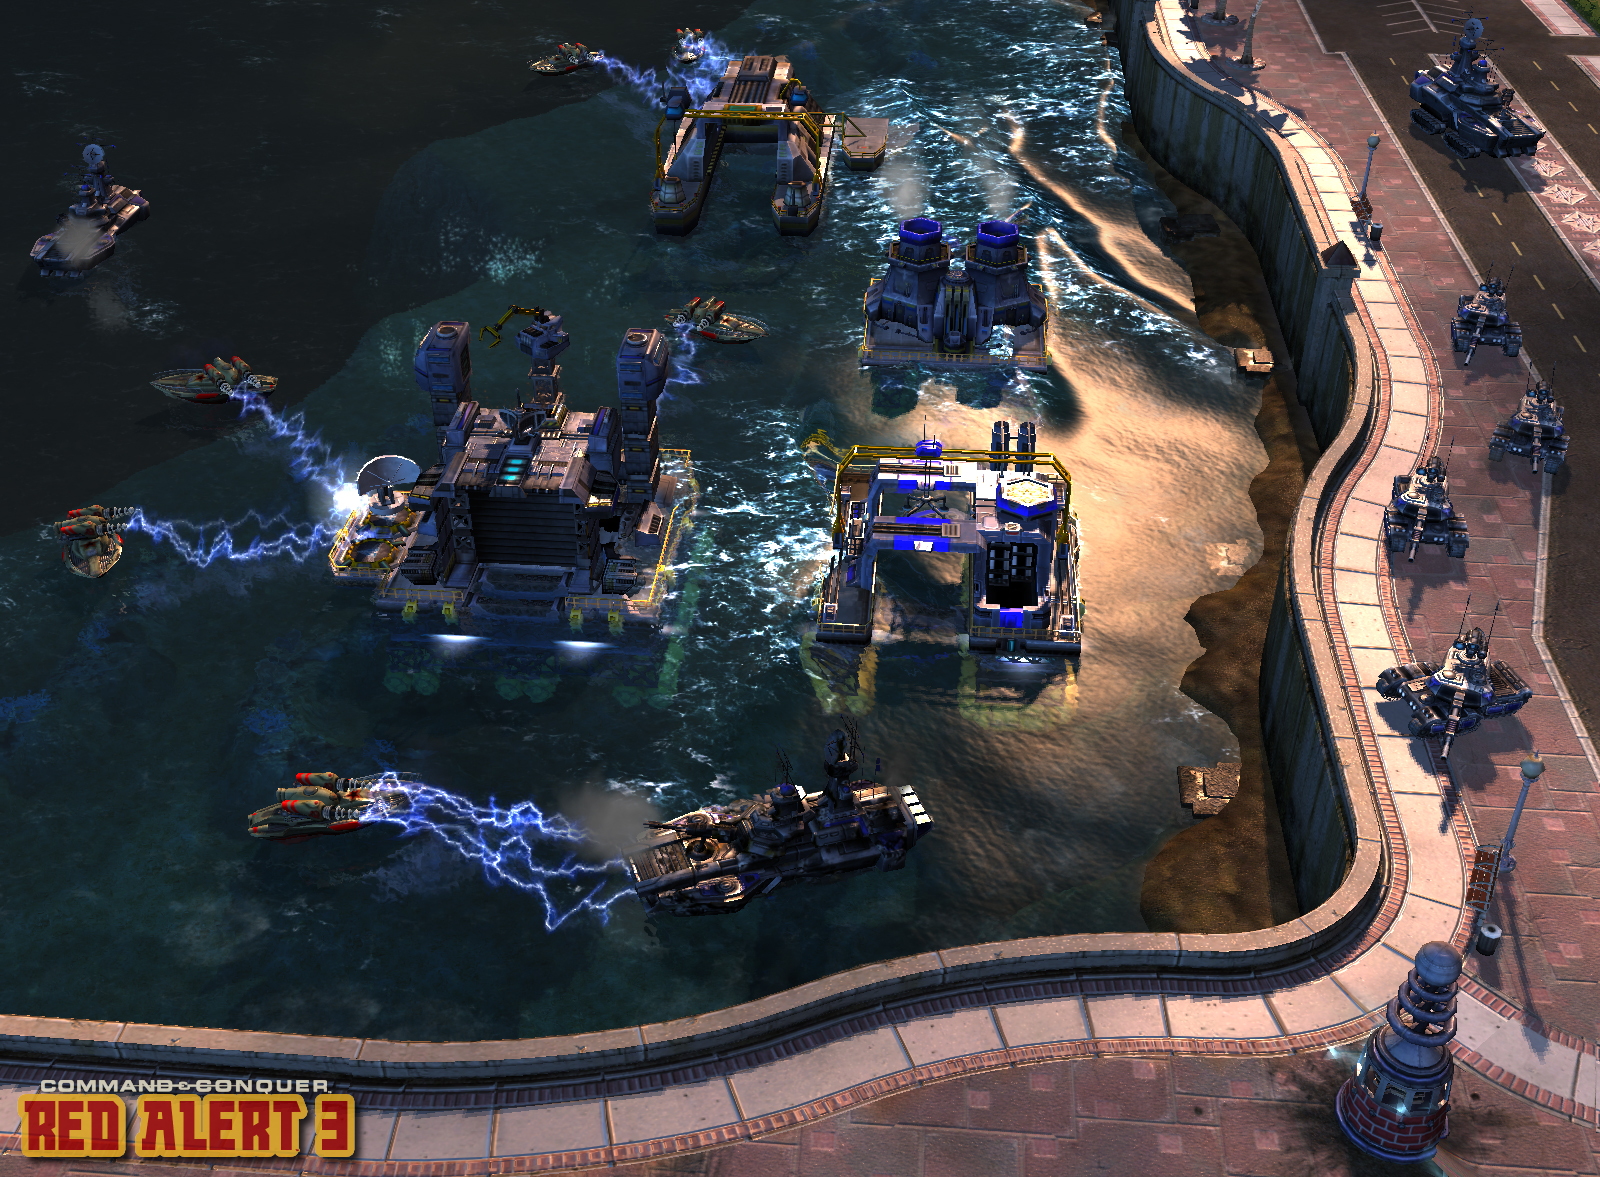 Command and Conquer, Red Alert 3, Naval COmbat, Naval Base, RTS, Game